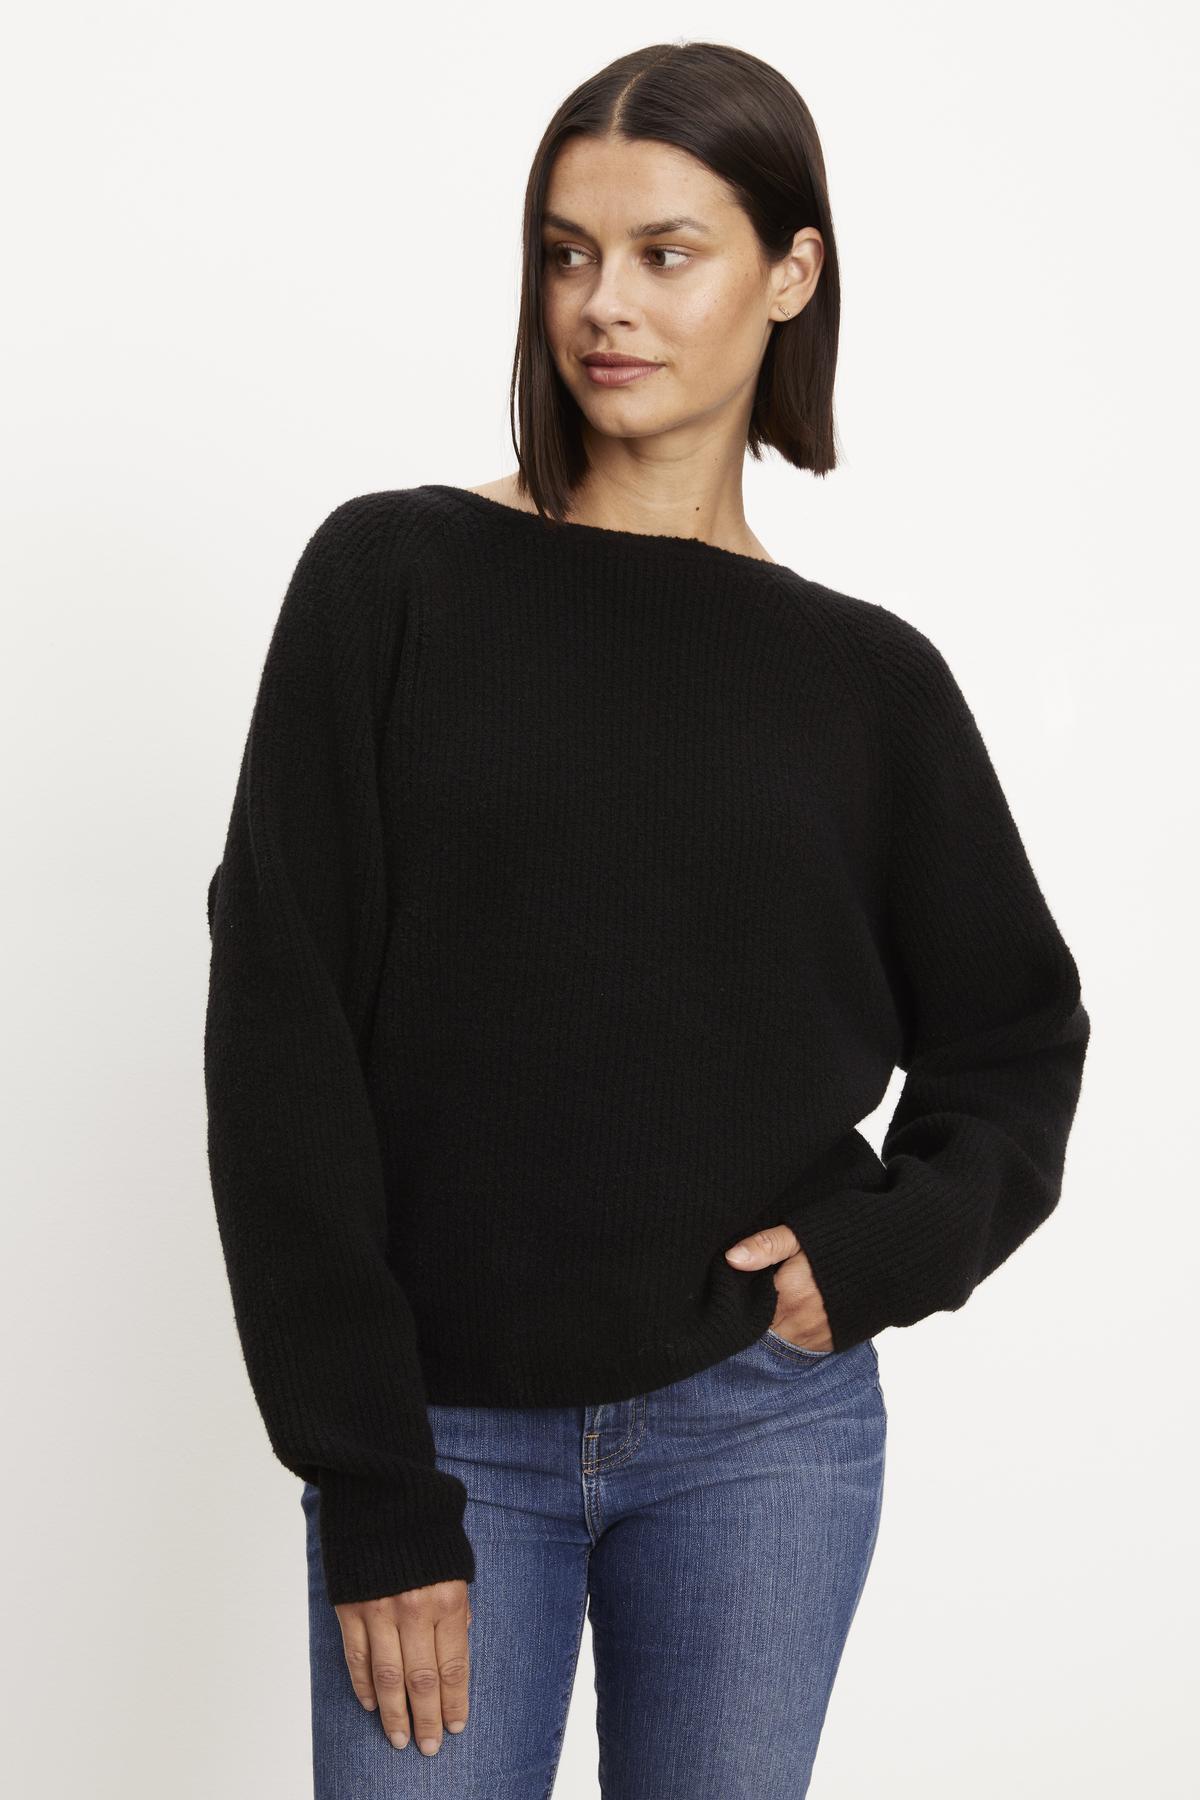 A model wearing a black Velvet by Graham & Spencer Caitlyn Boucle Raglan Sweater and jeans.-36094304616641